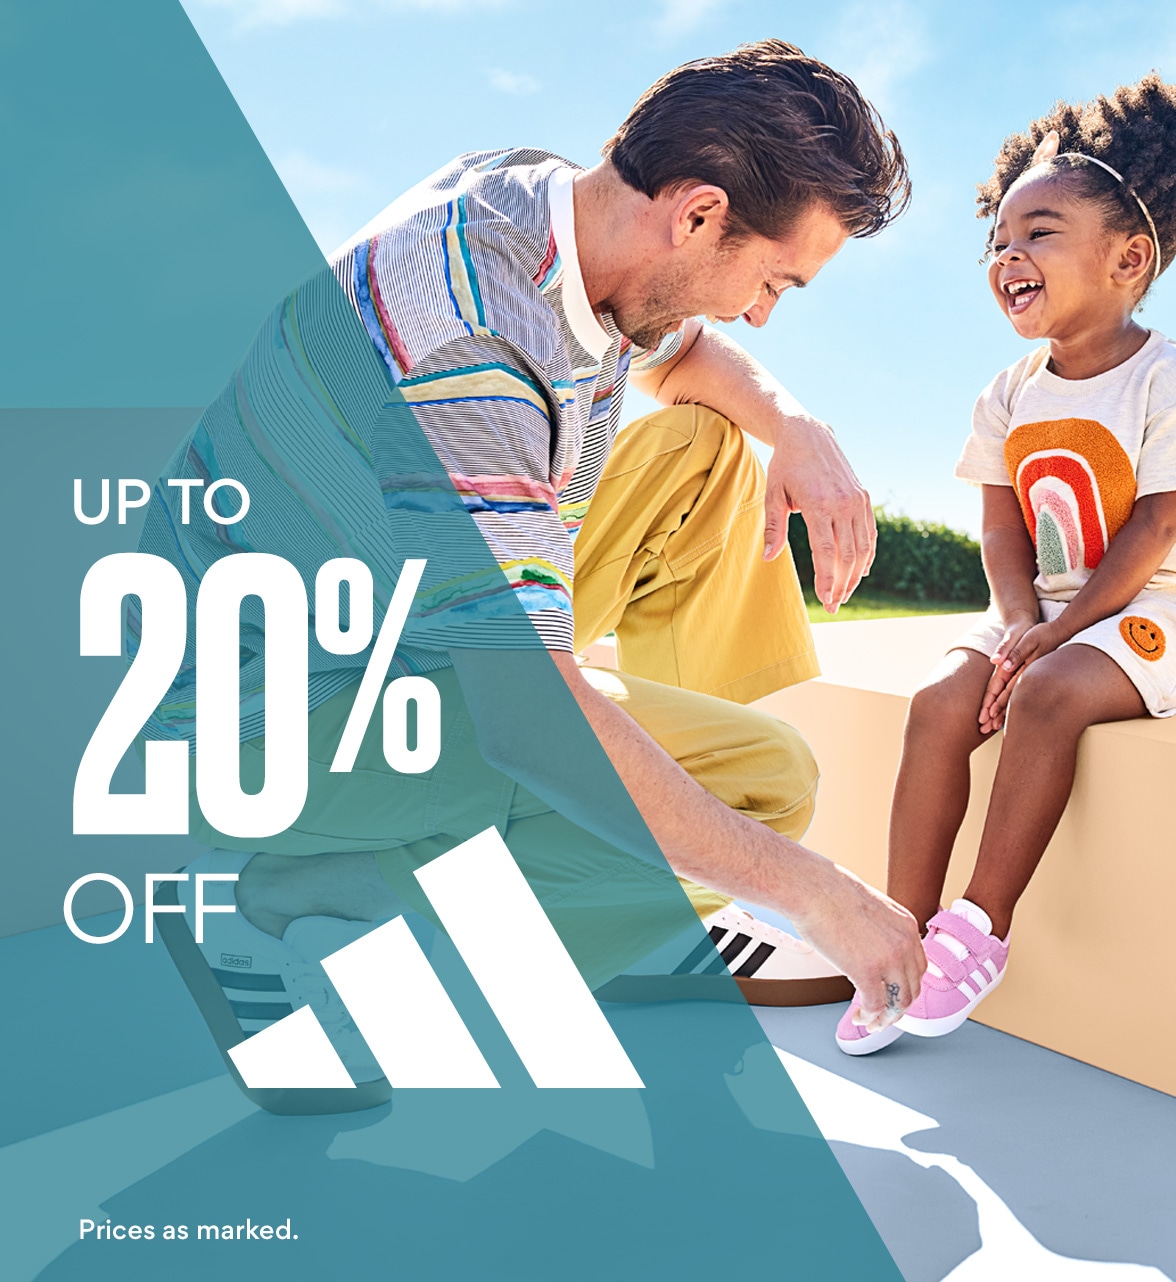 up to 20% off adidas. prices as marked